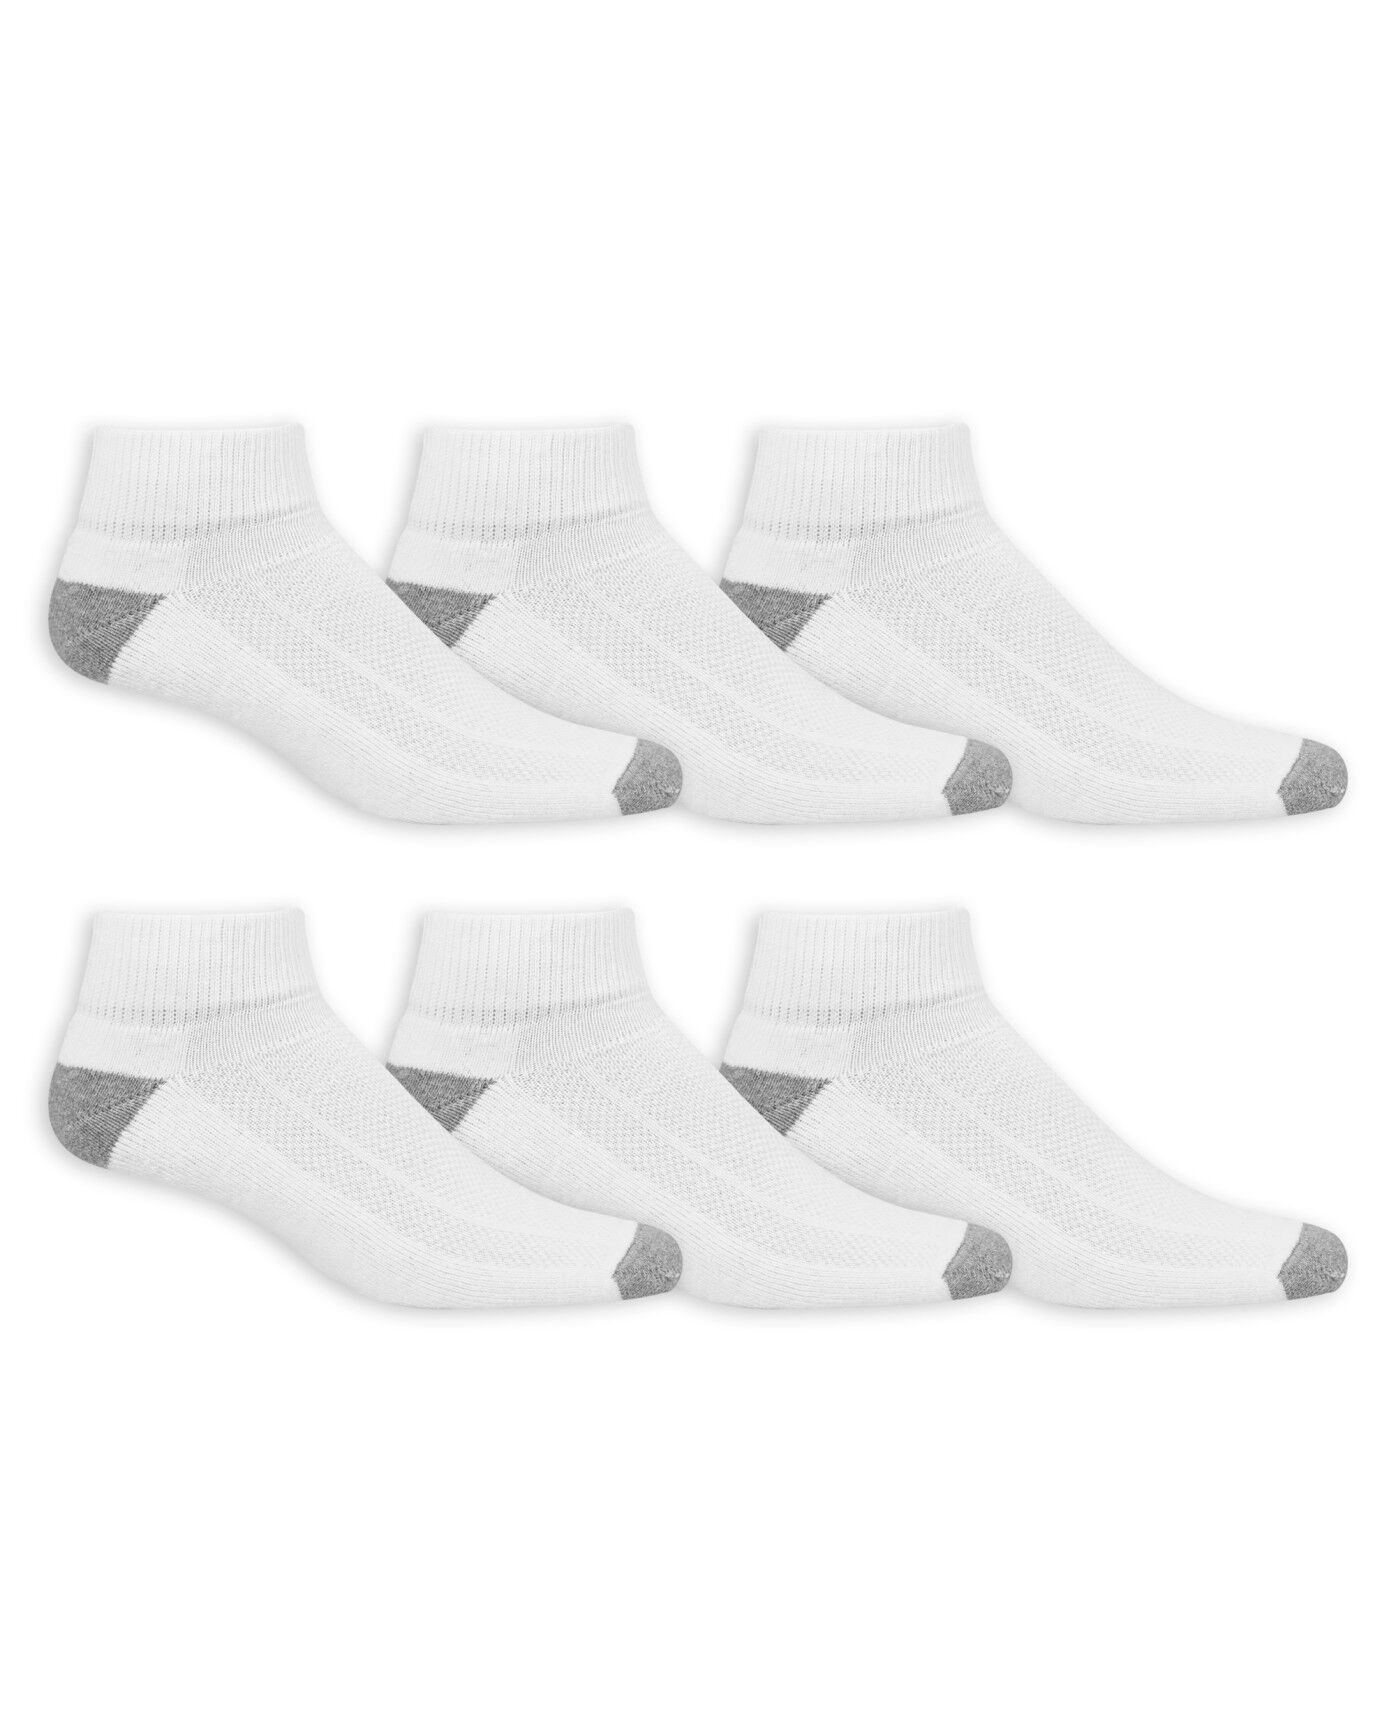 6 Pair Pack Fruit of the Loom Boy's Breathable Cotton Quarter Socks